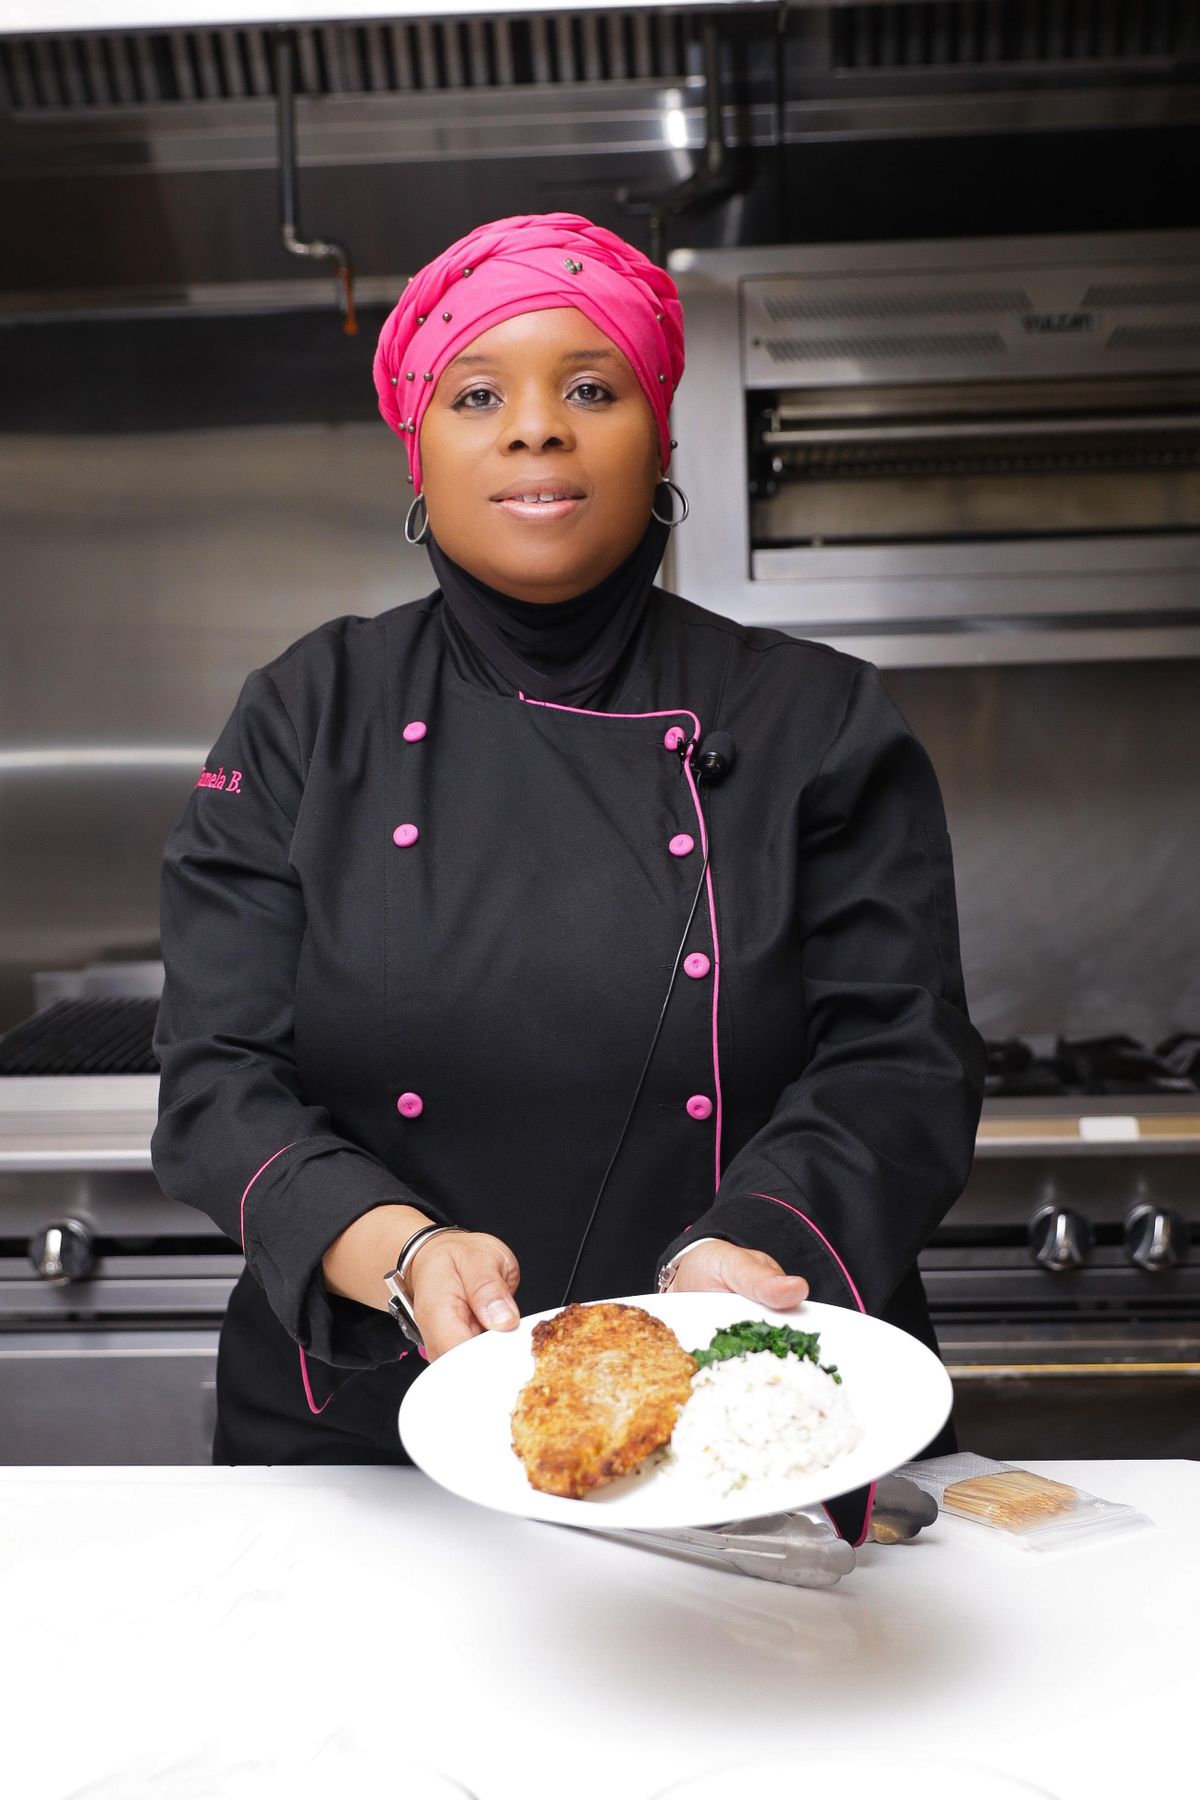 The Story of Islam through Food Presented by Chef Jamela Bilal